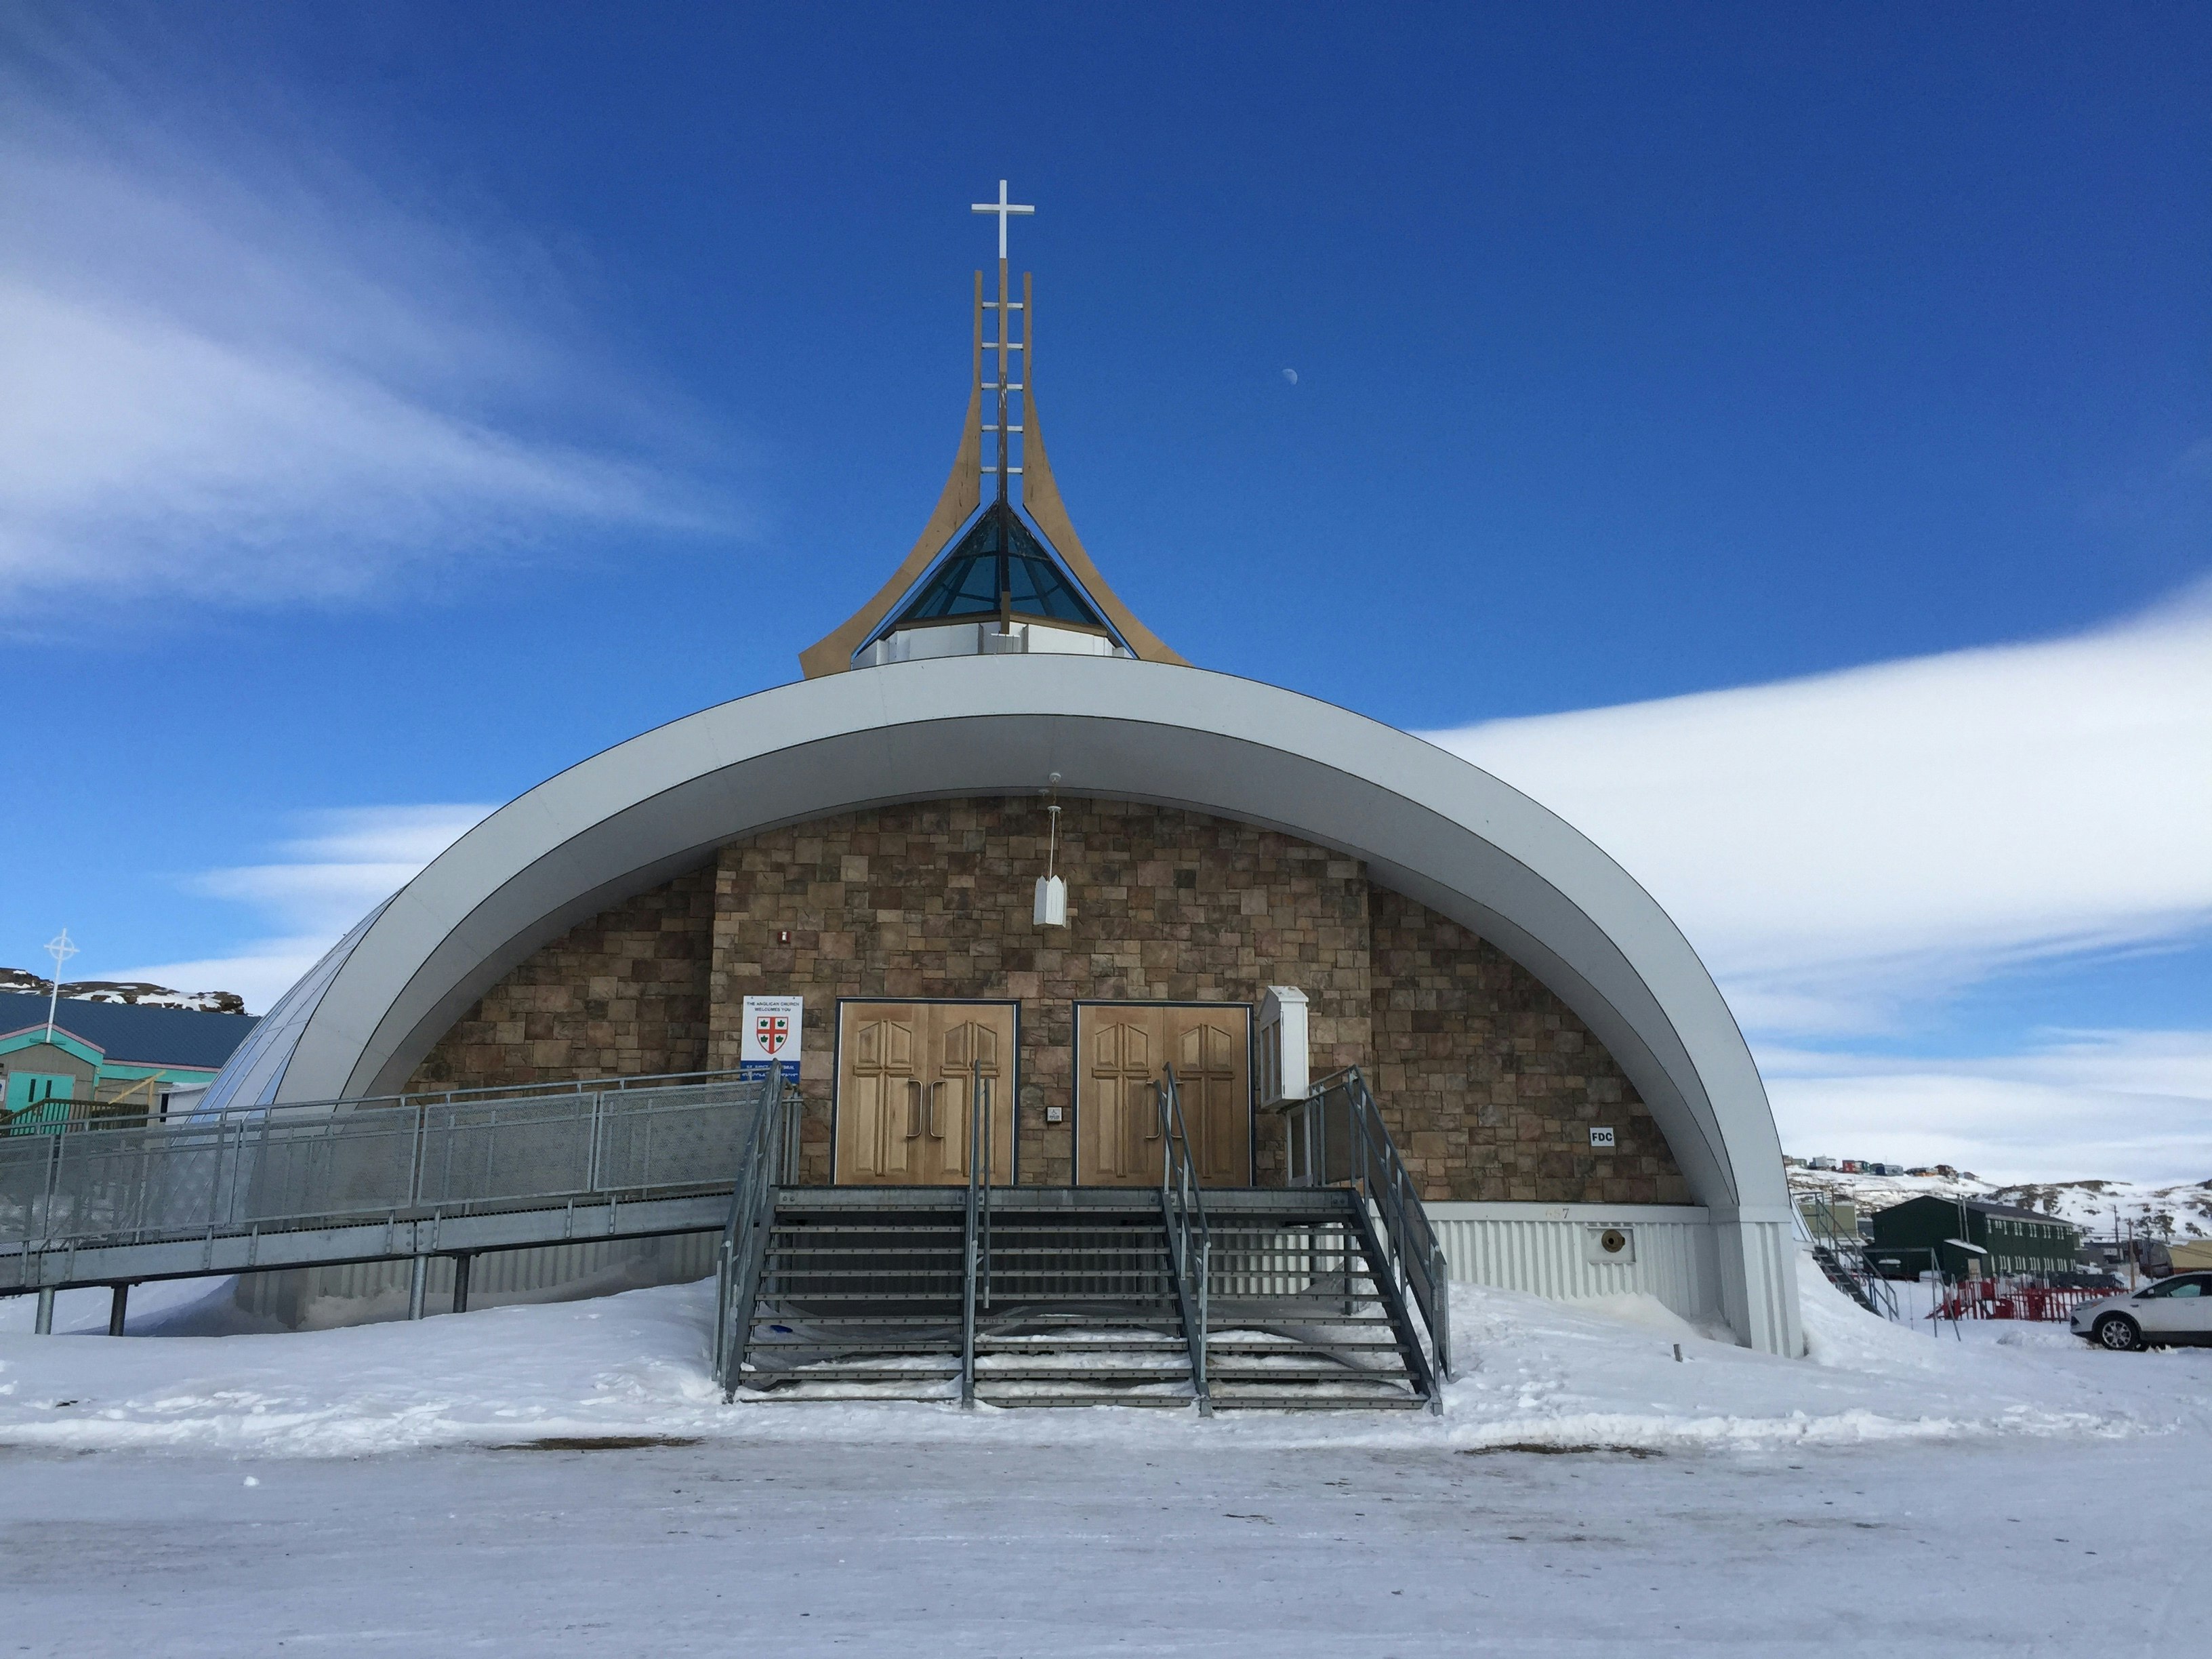 St Jude's Igloo Cathedral in Iqaluit; the structure is roughly dome-shaped to resemble an igloo, and is topped with a spire.